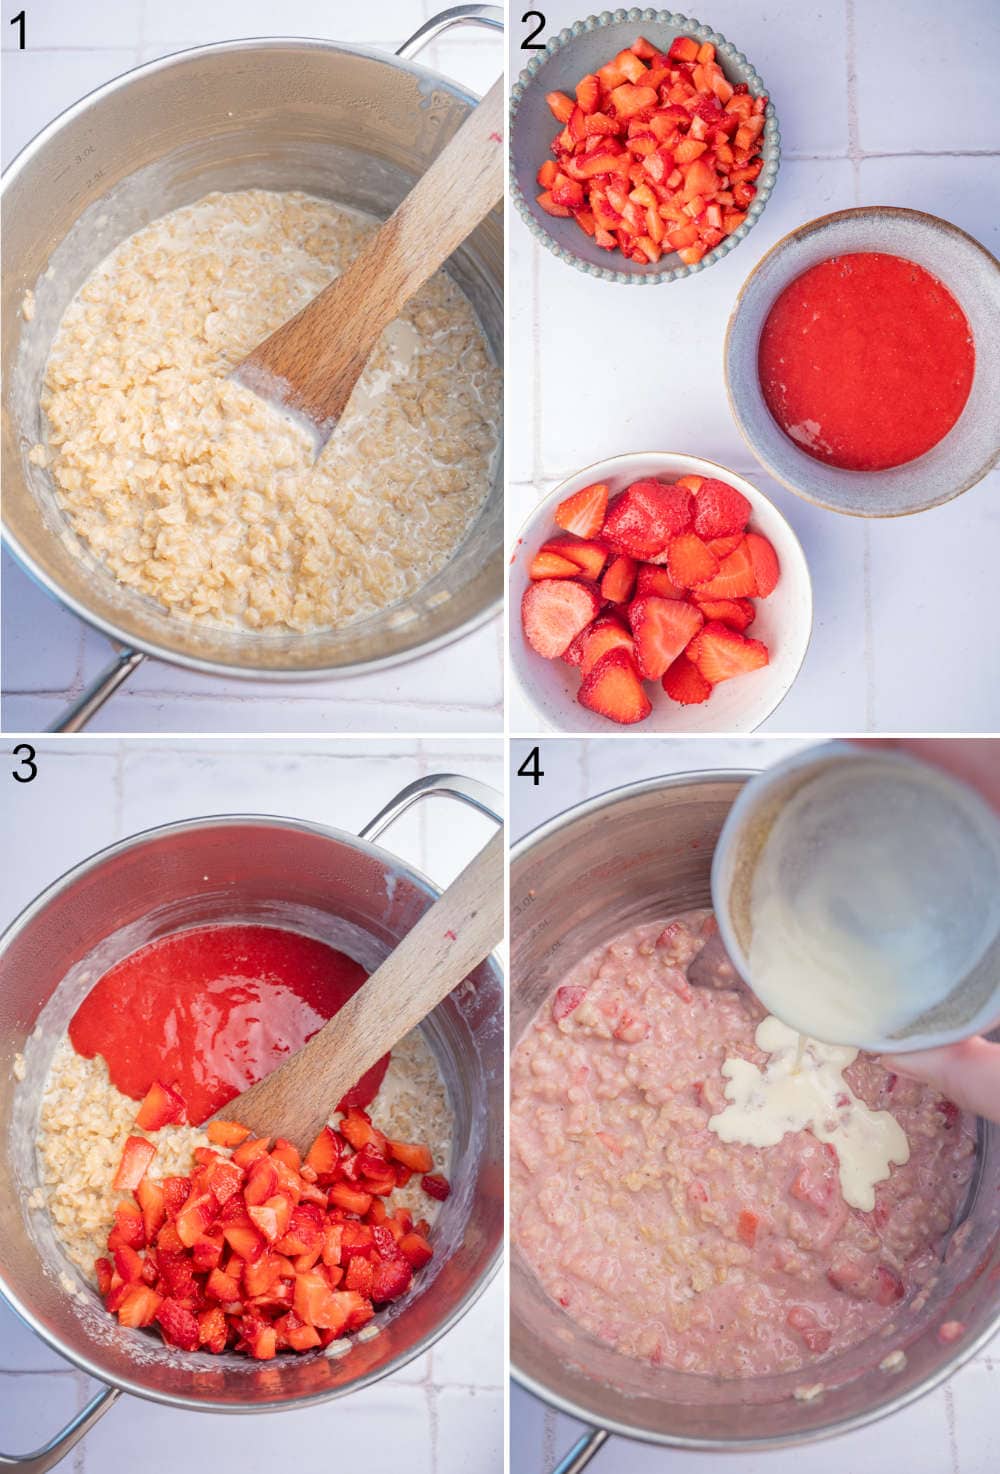 A collage of 4 photos showing how to make strawberries and cream oatmeal step by step.